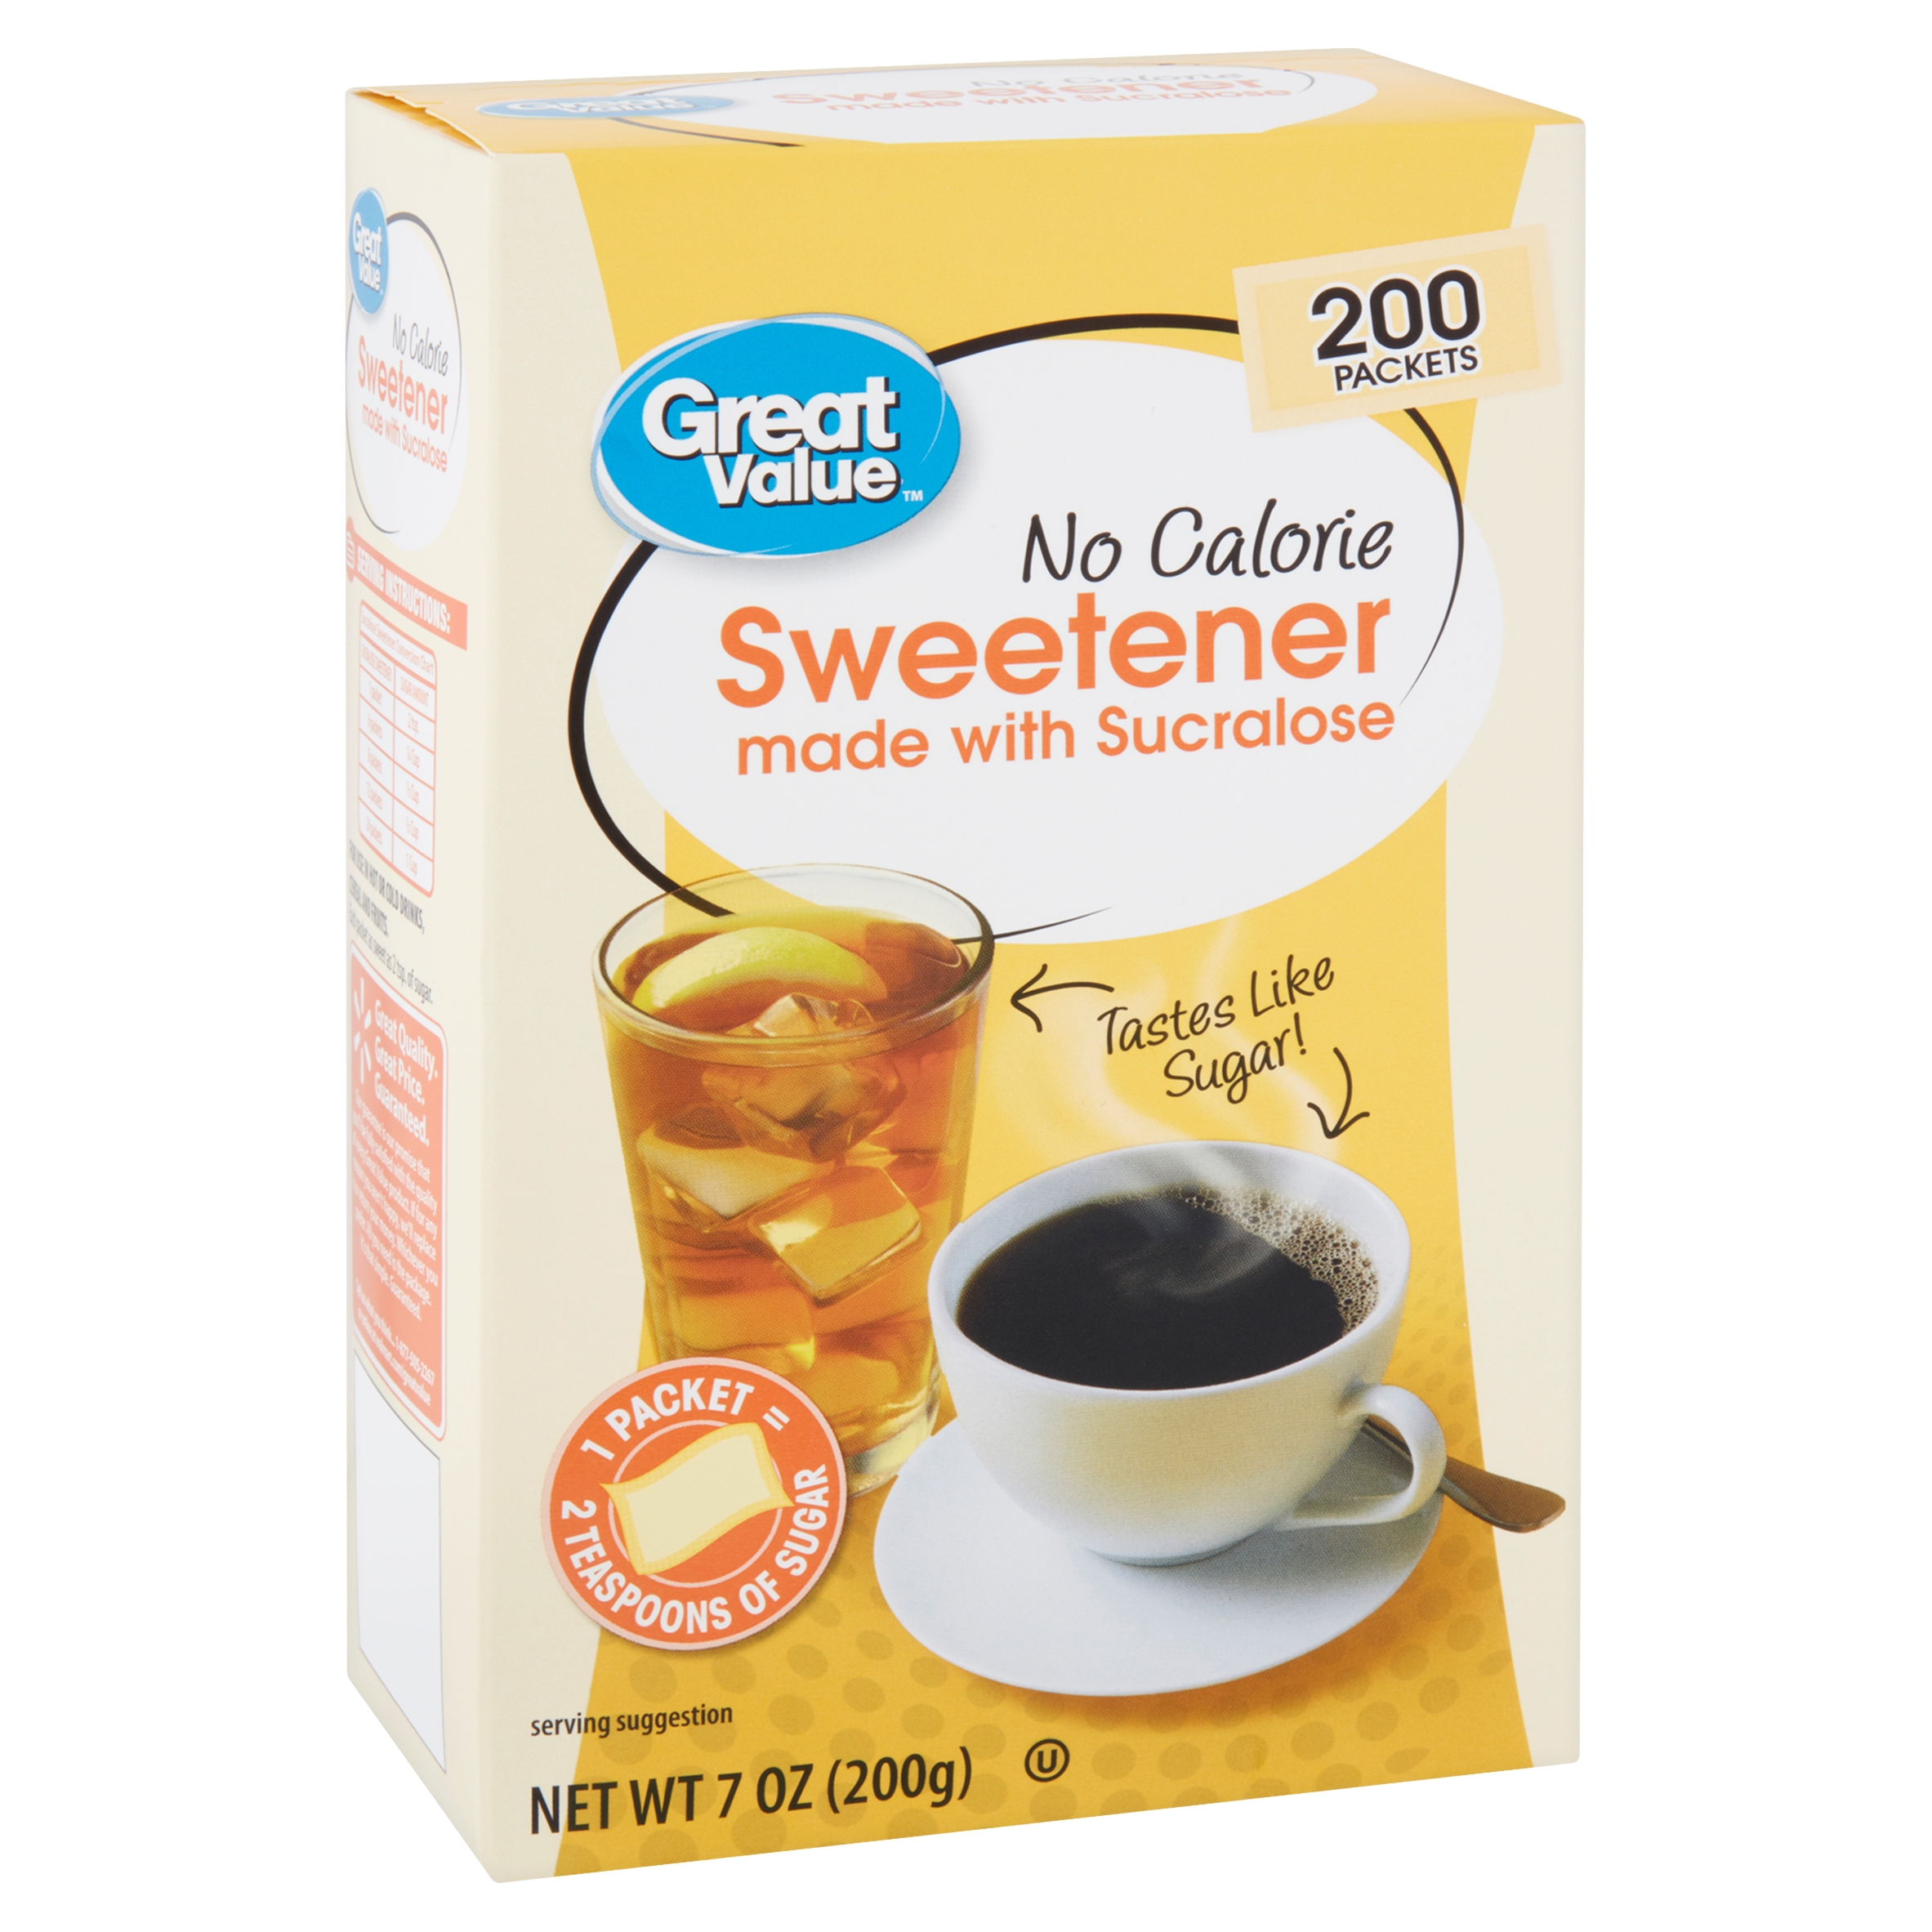 (400 Packets) Great Value Sweetener with Sucralose Packets Image